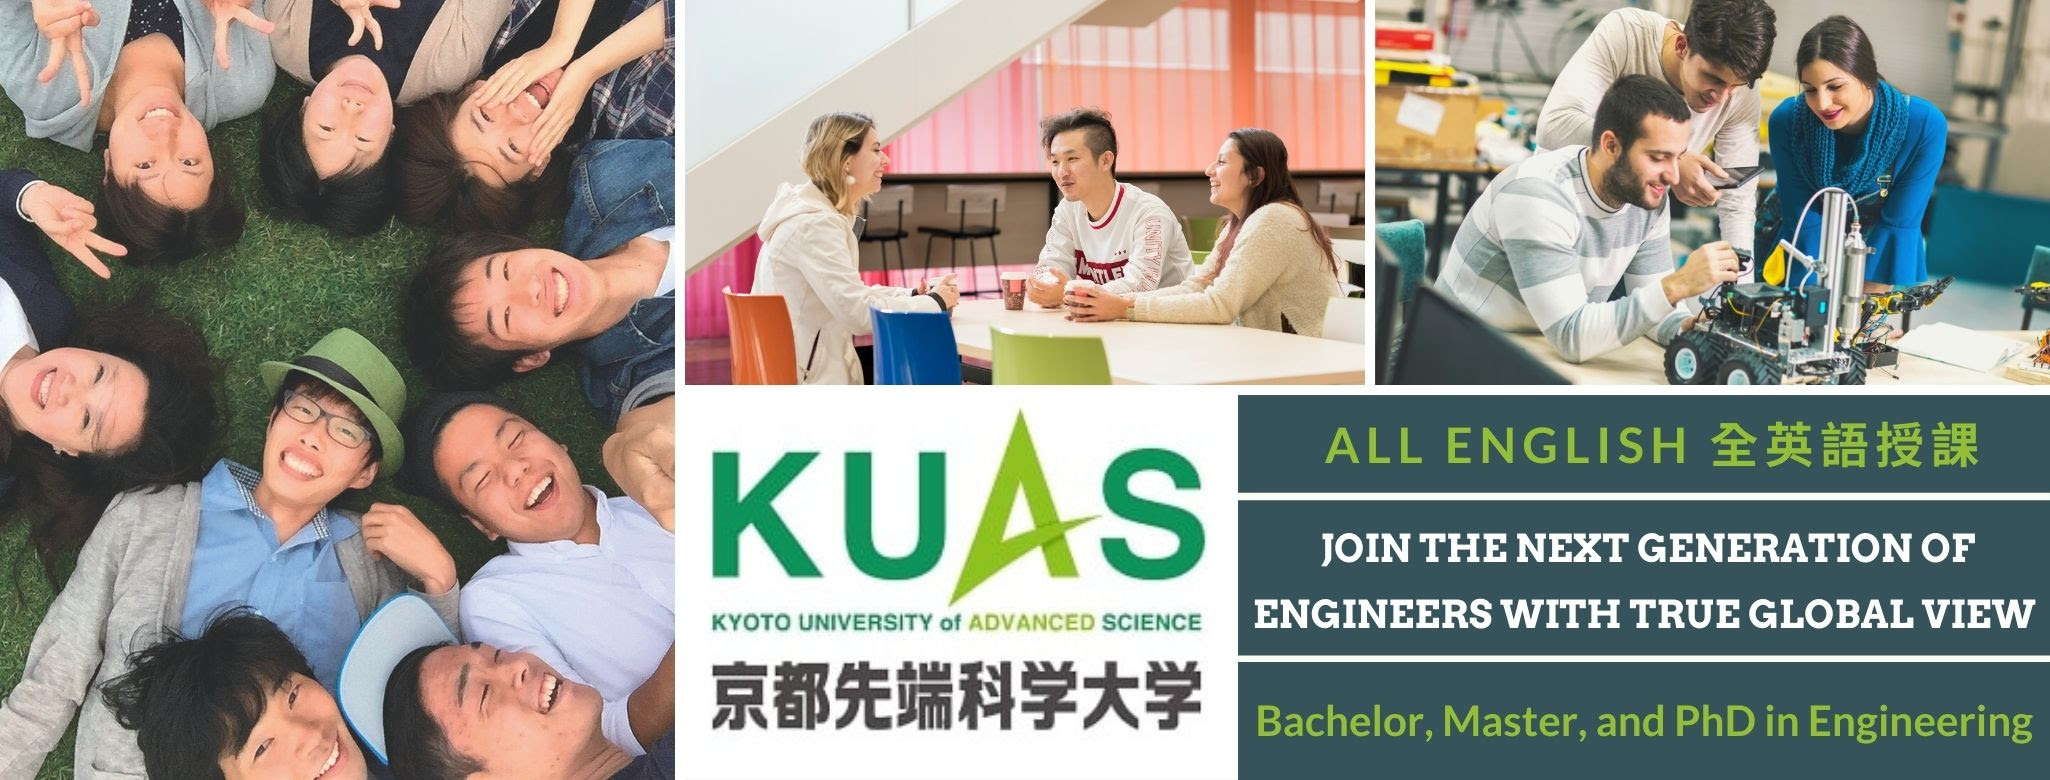 Kyoto University of Advanced Science, All English Undergrad and Graduate Program in Engineering. Application for 2022 Intake starting.